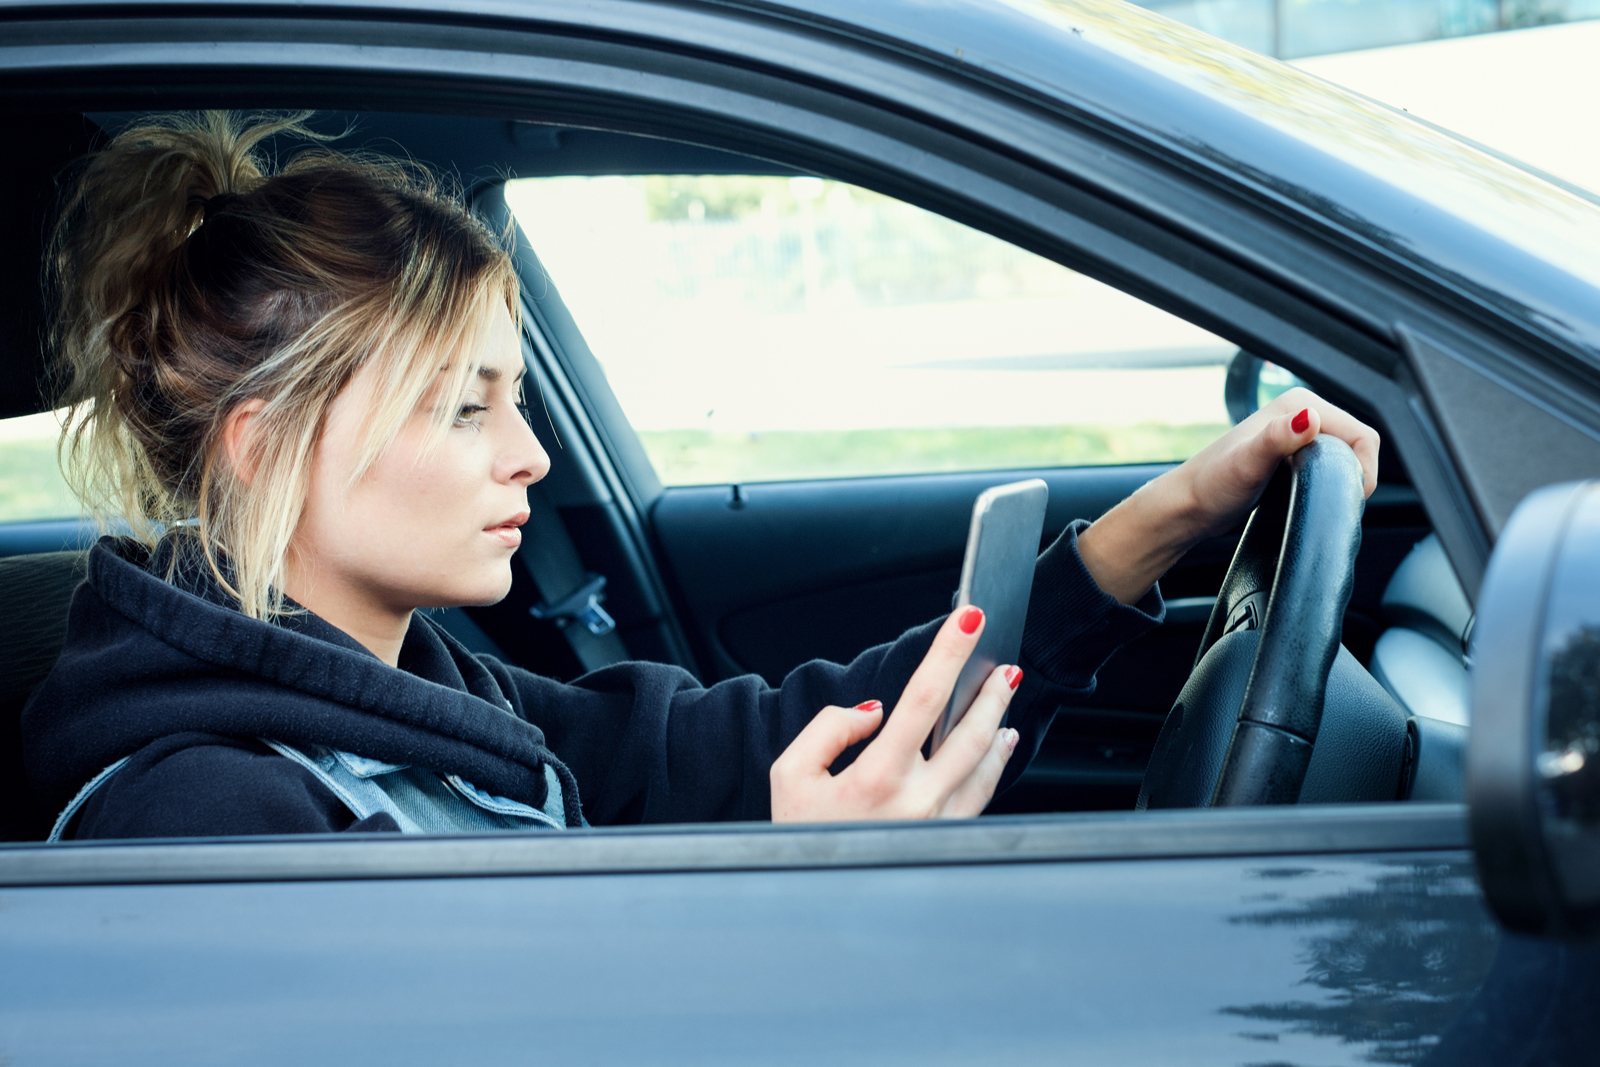 A woman driving and using her phone at the same time